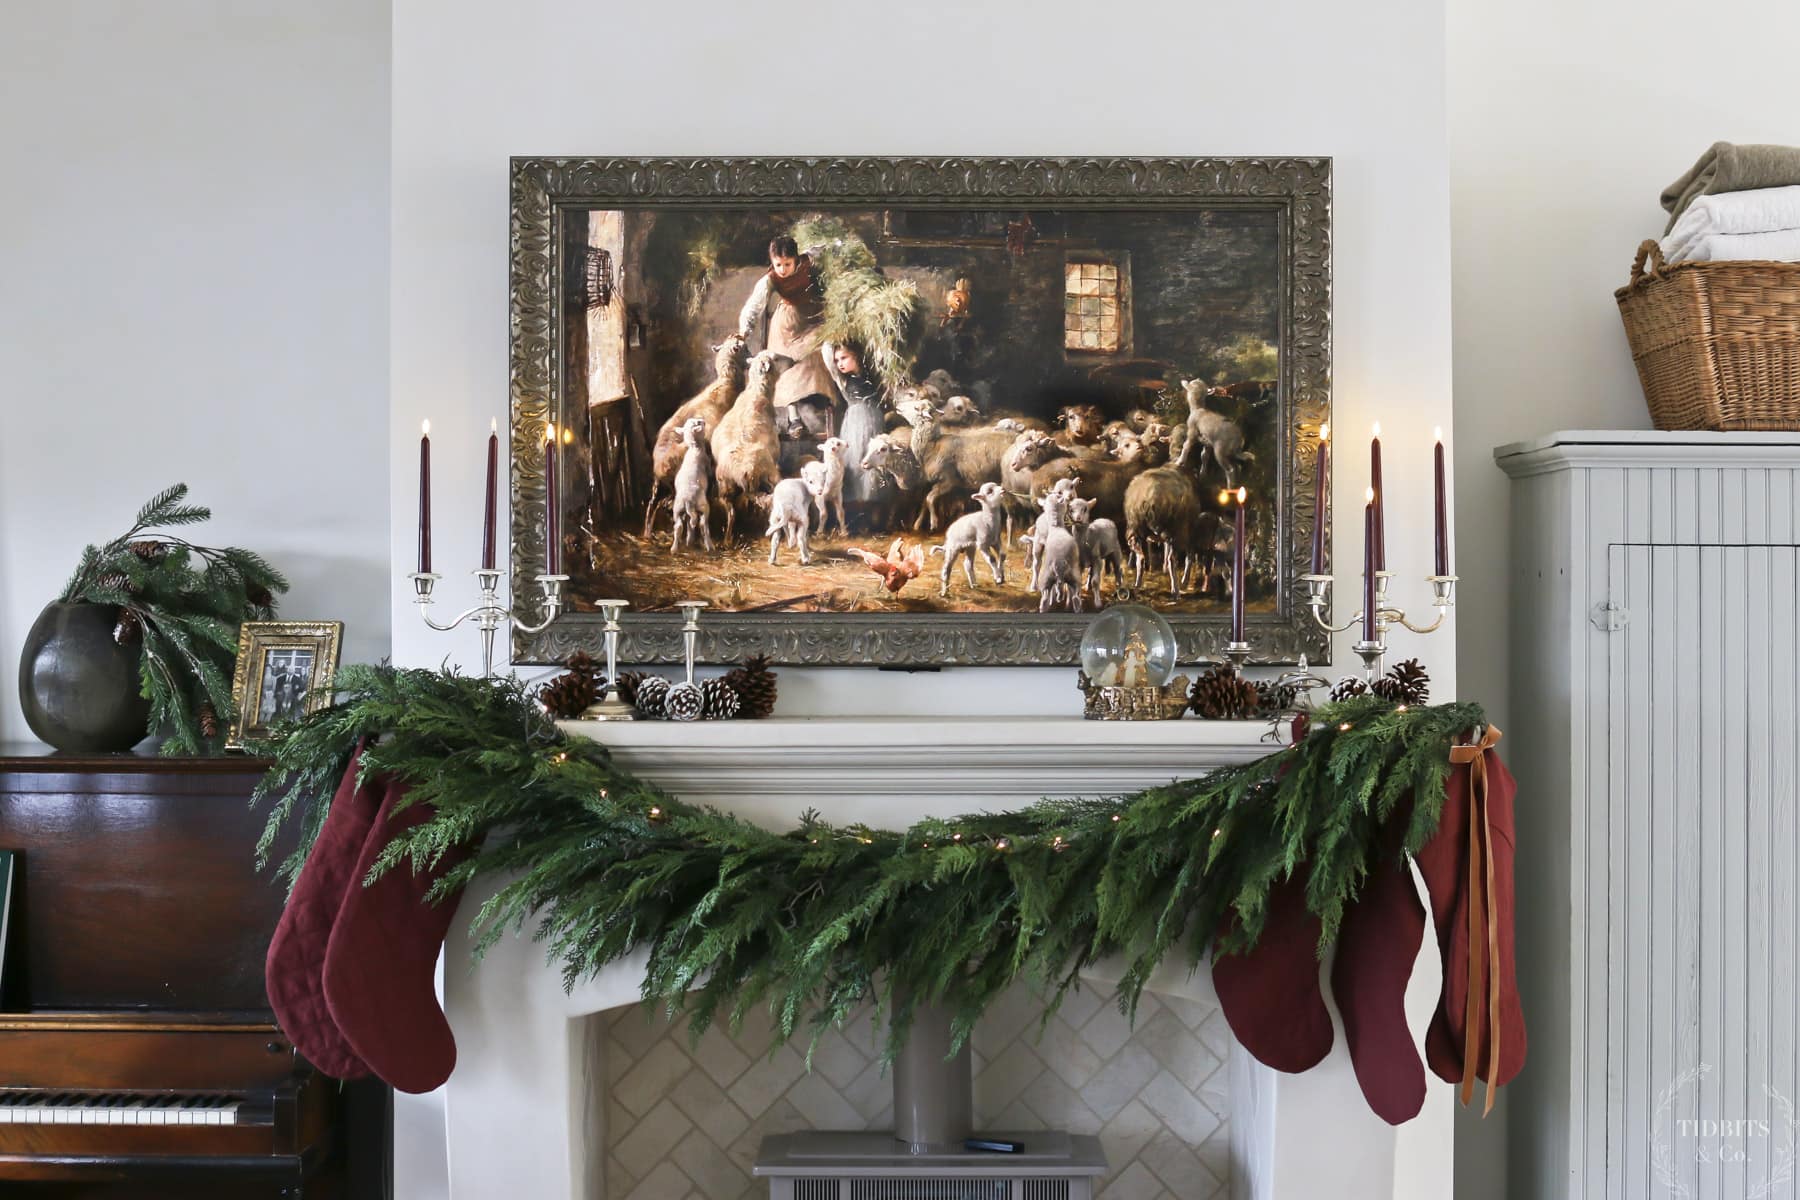 A Christmas fireplace with decorations and art hung above it